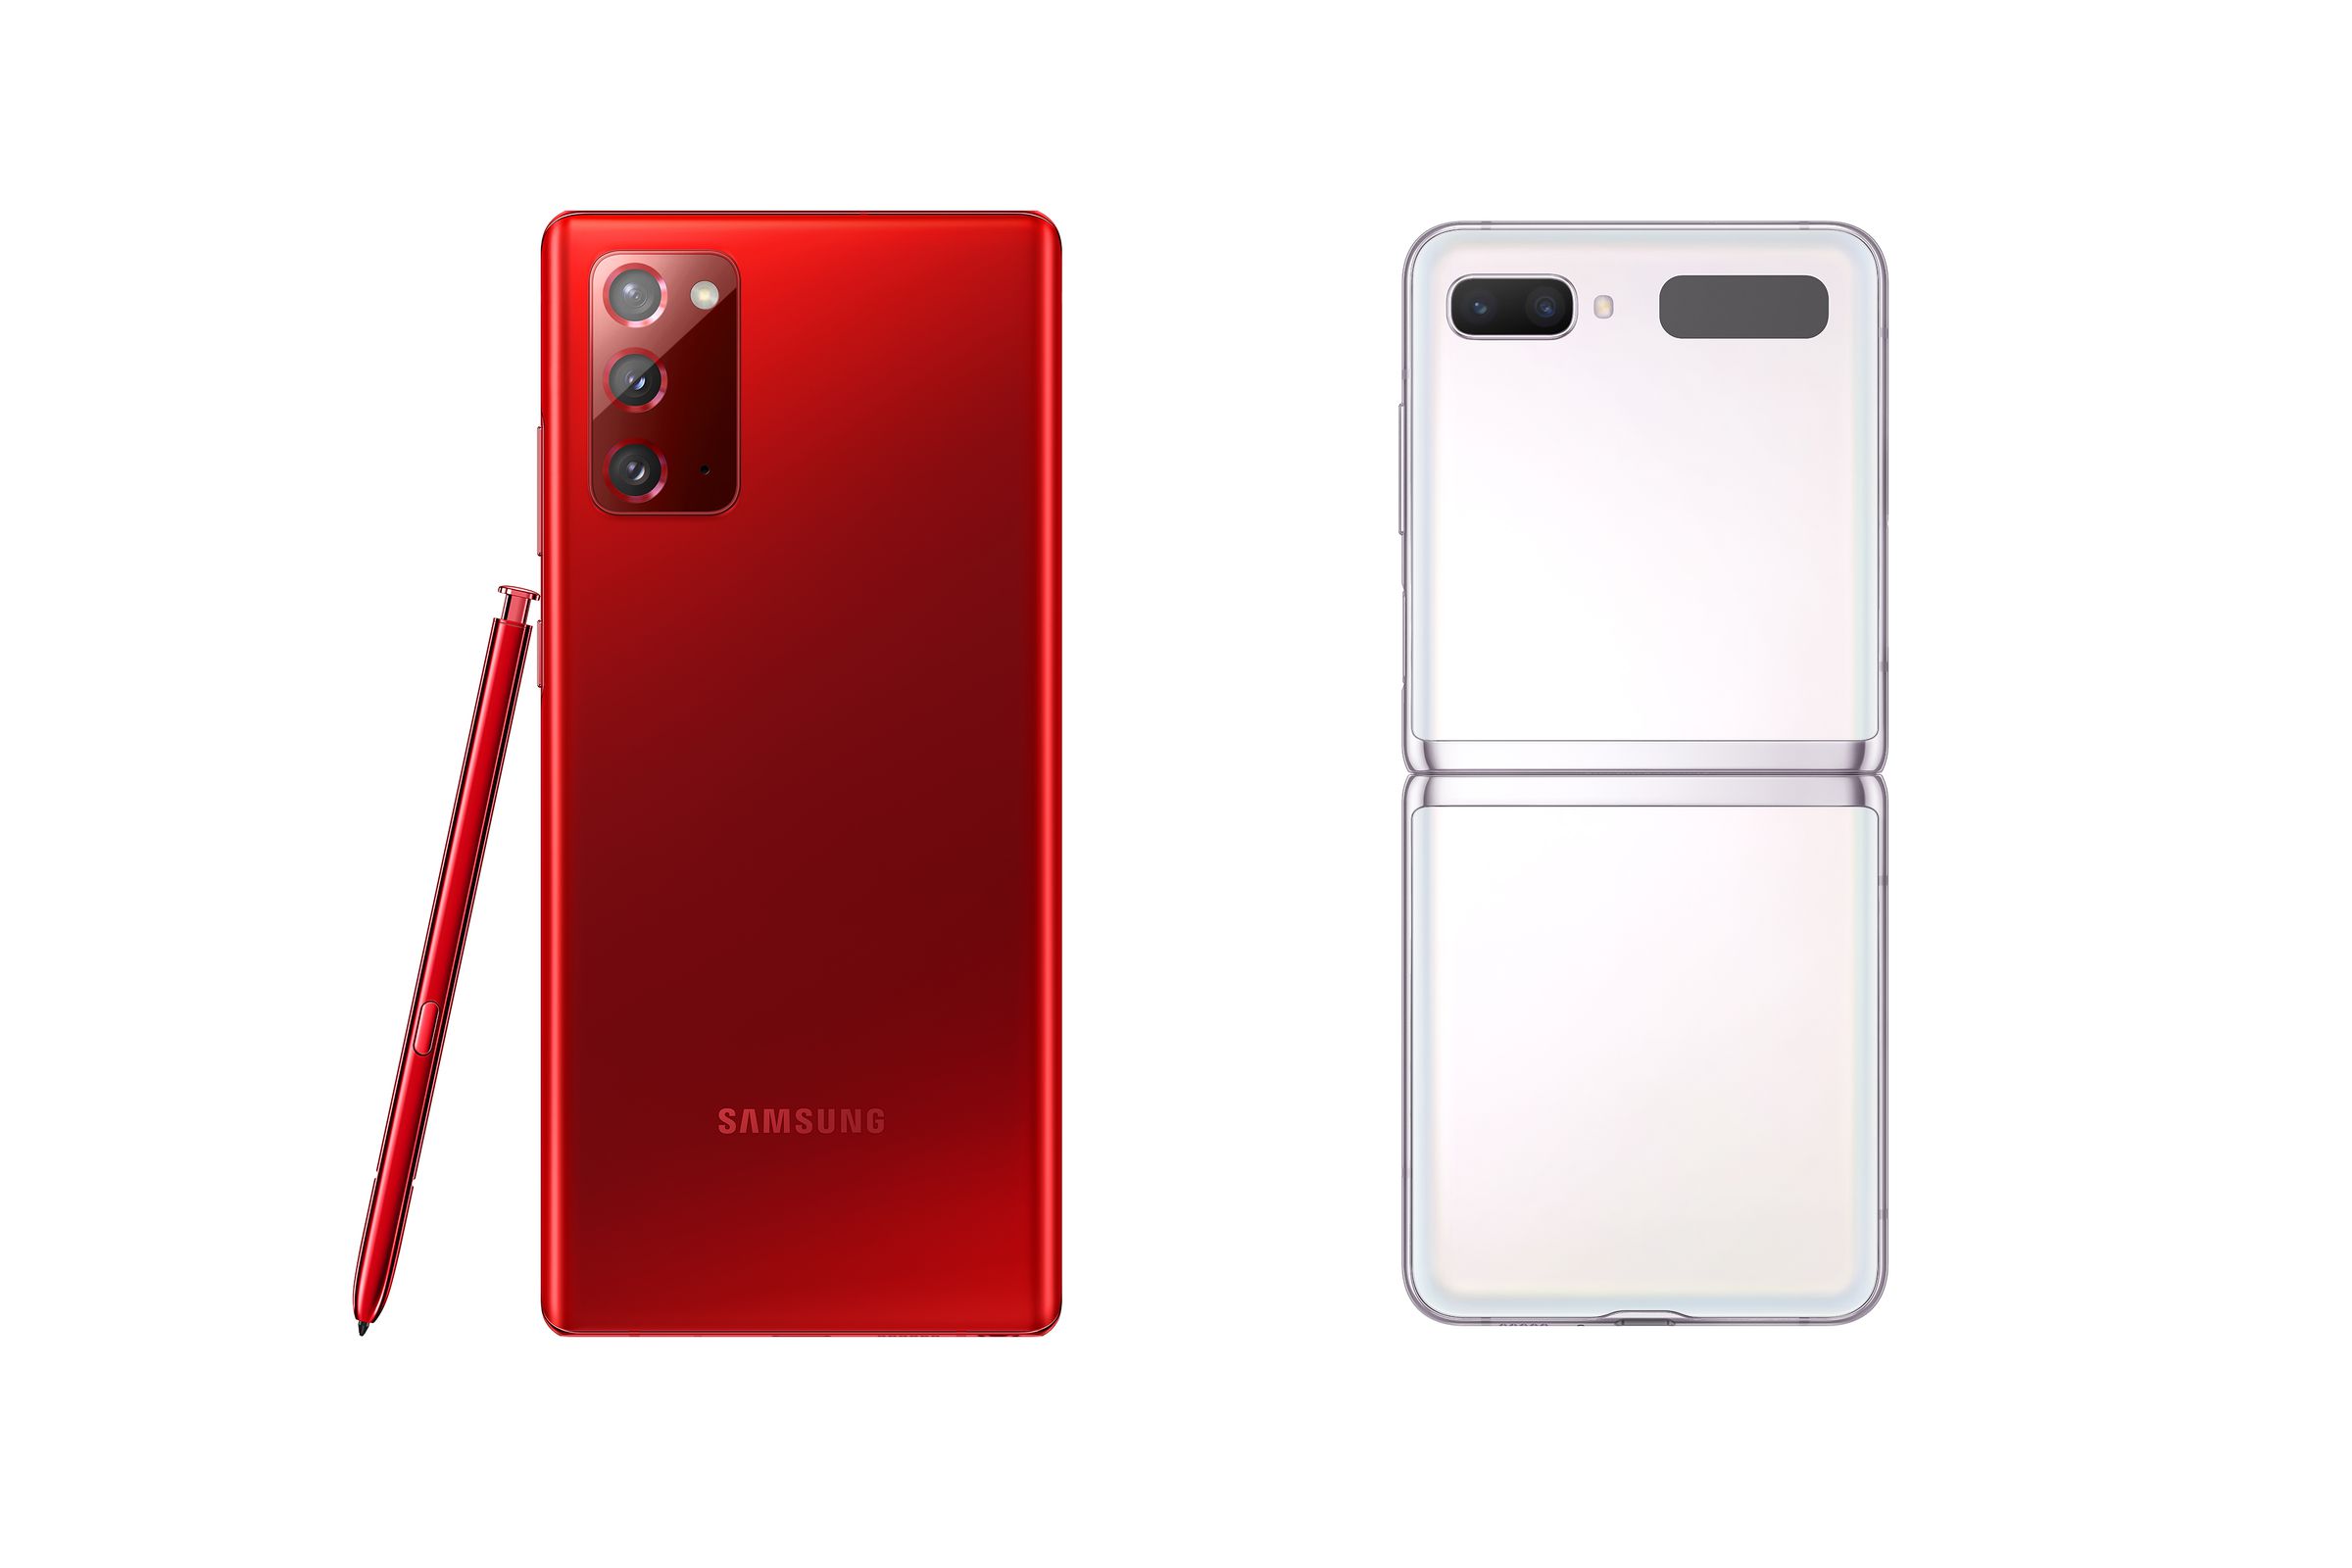 The Note 20 5G (left) is getting a new red color, while the Z Flip 5G (right) will be sold in white.